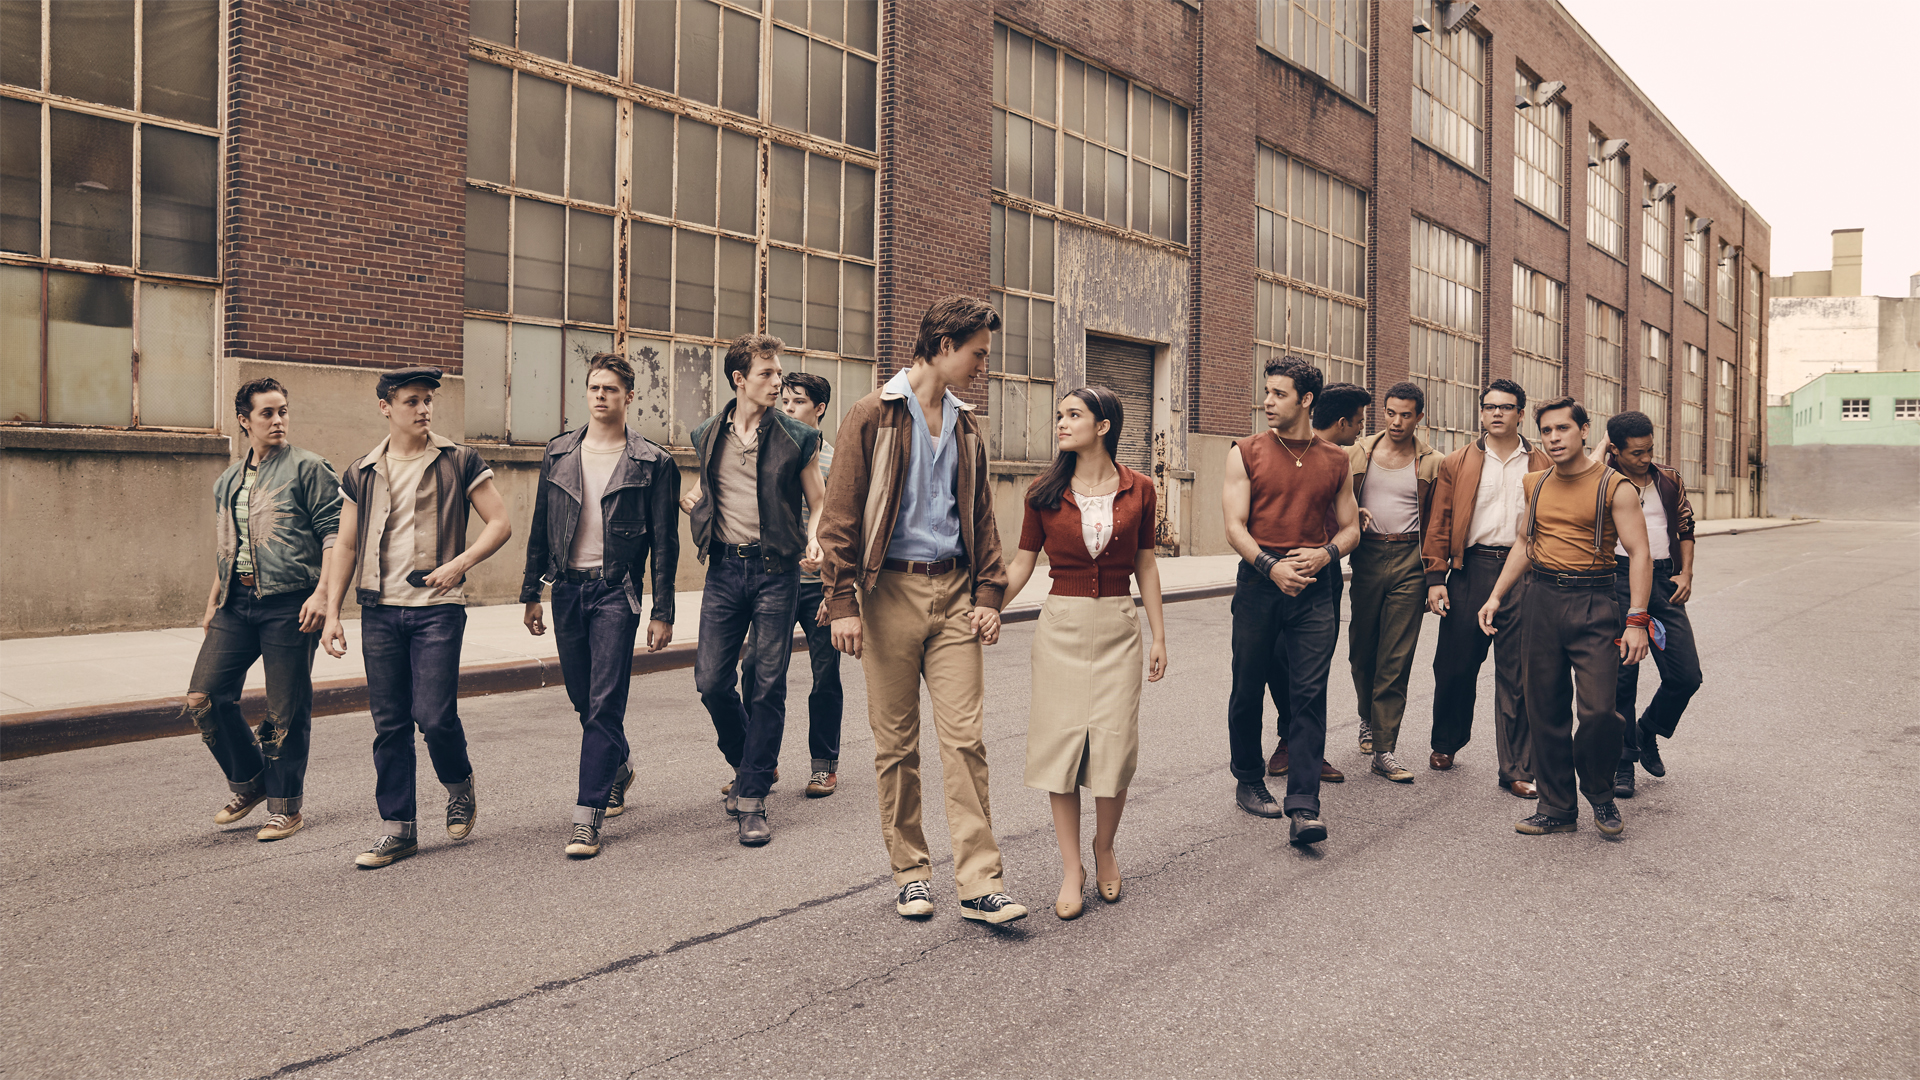 A screenshot from Stephen Spielberg's West Side Story